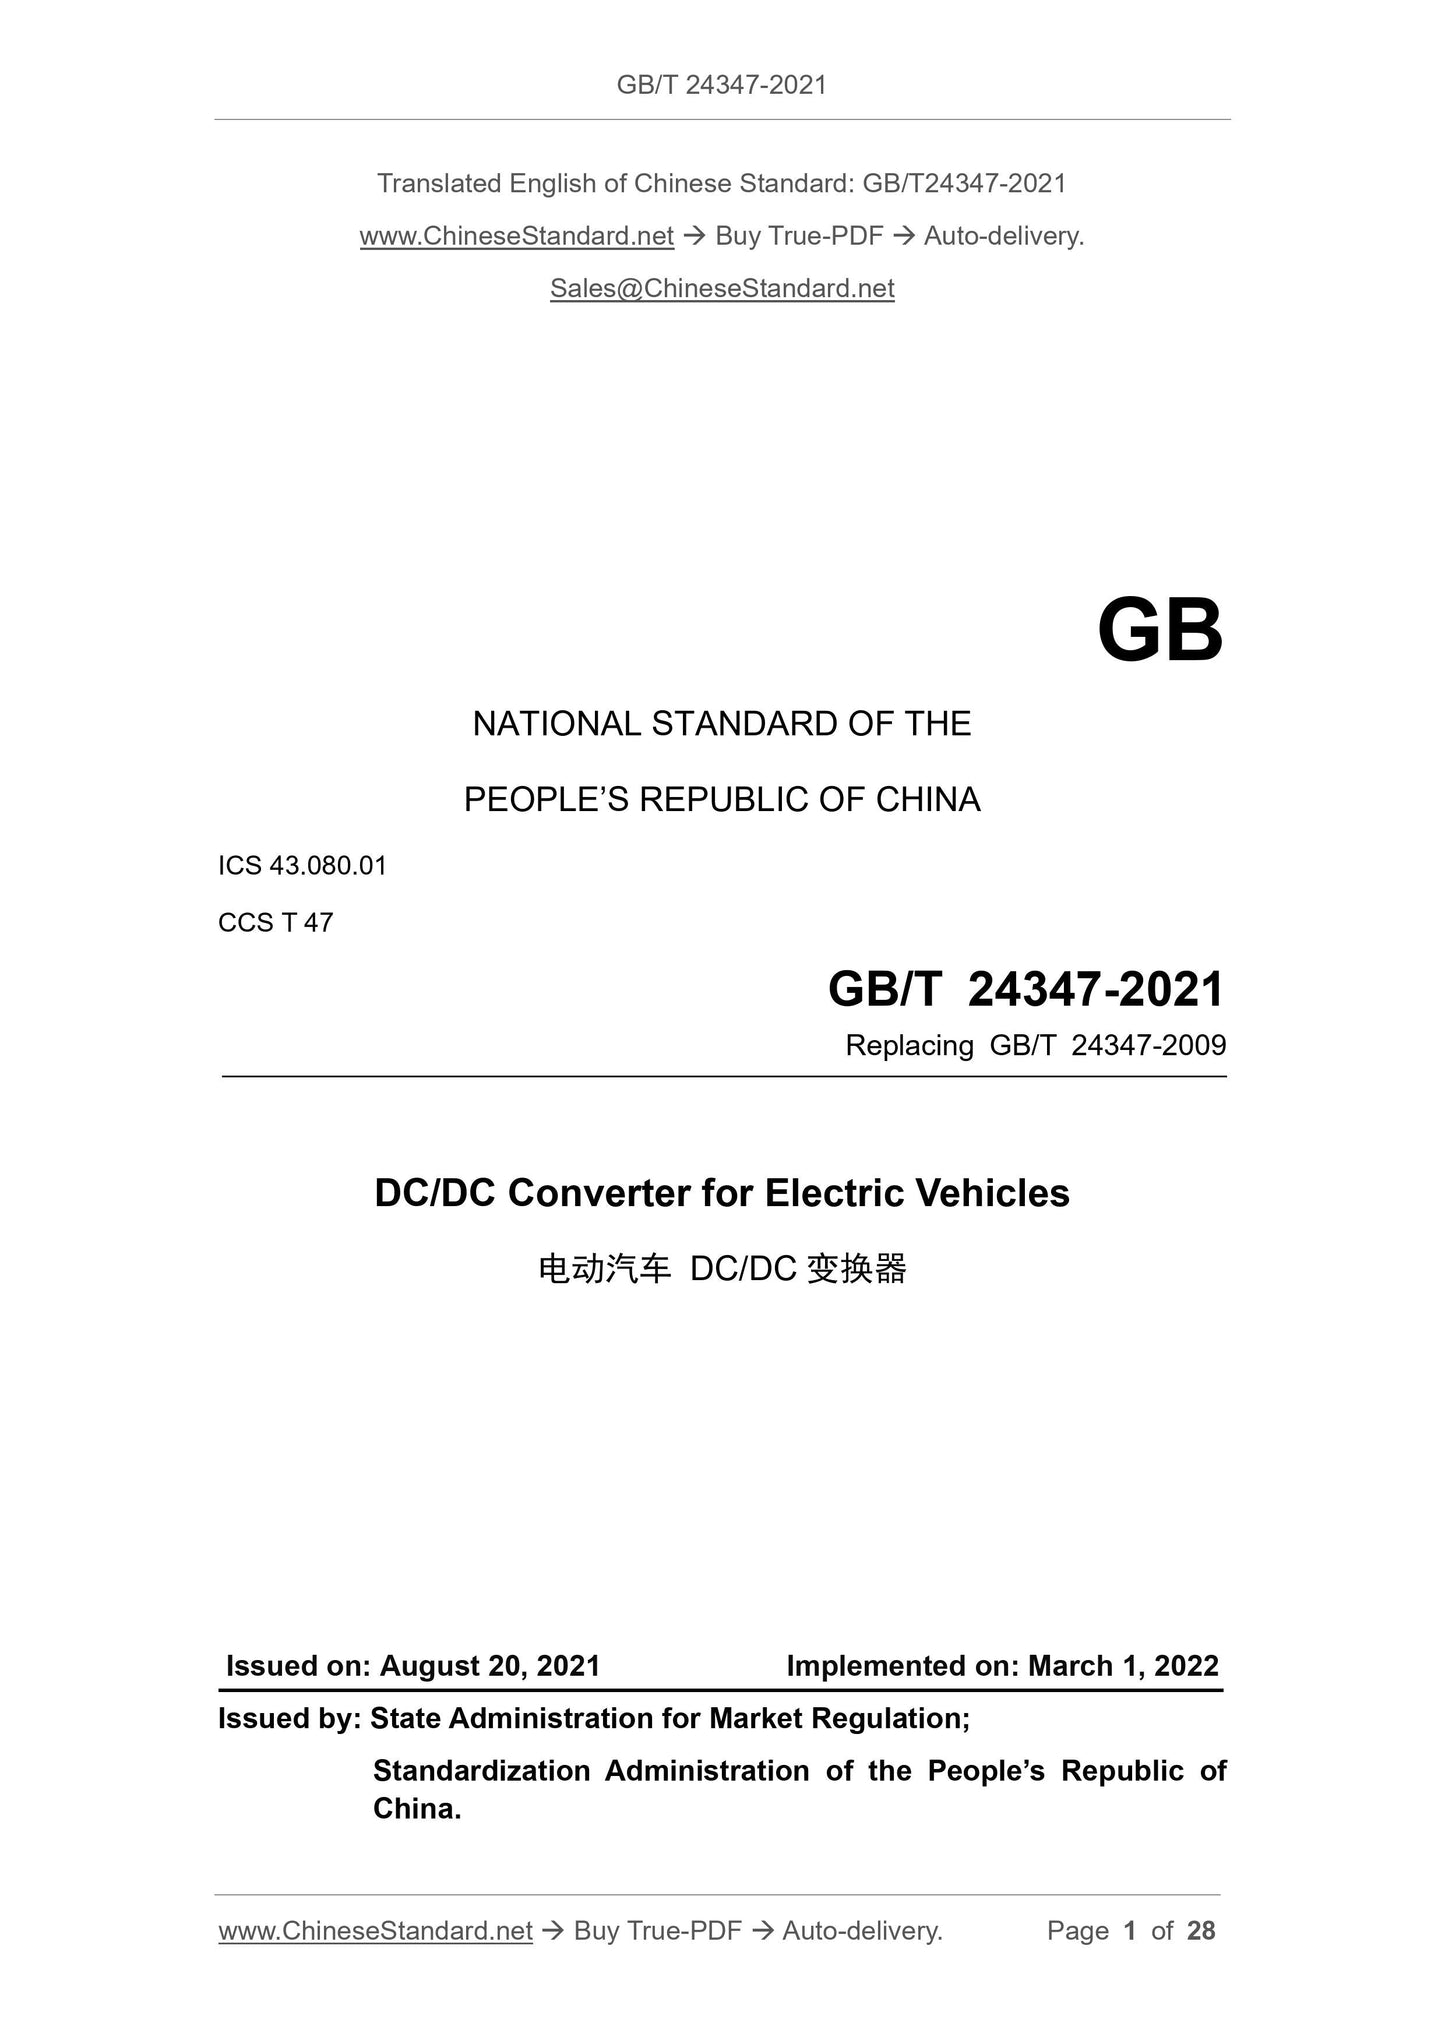 GB/T 24347-2021 Page 1